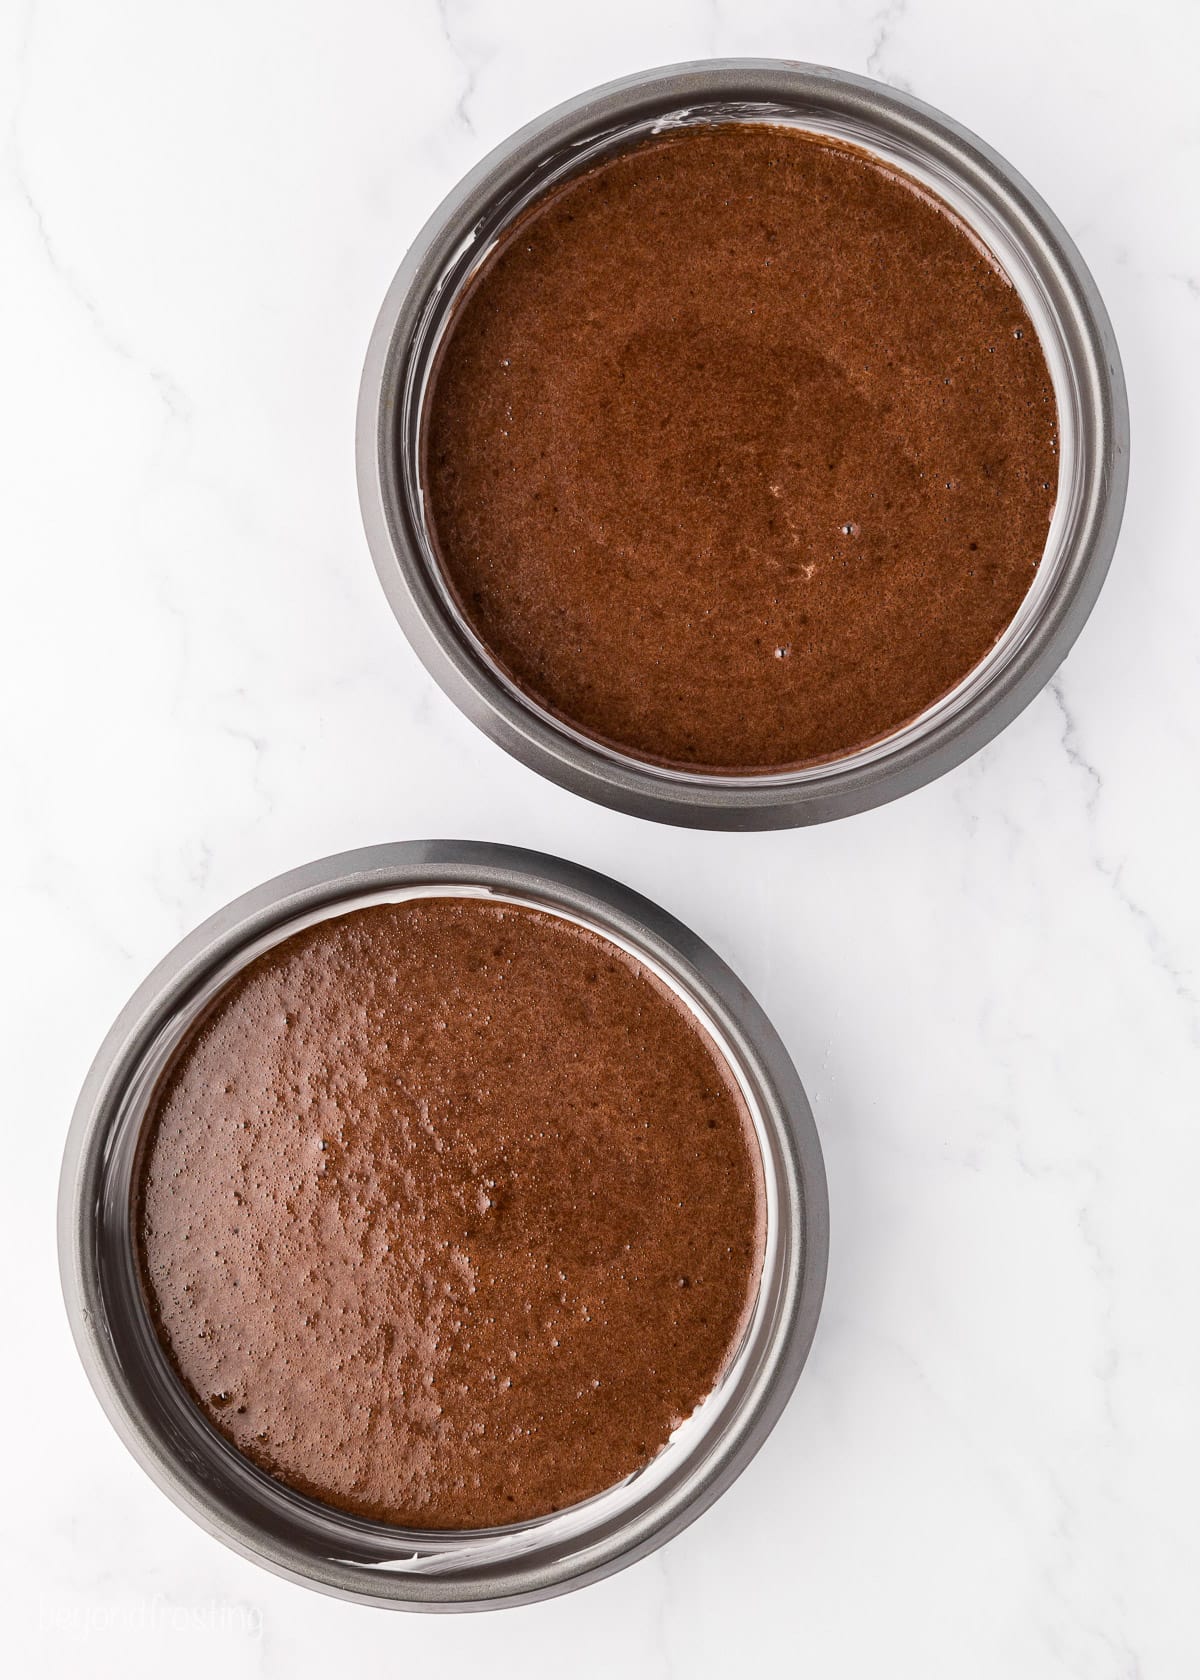 Overhead view of two baked chocolate cakes in round cake pans.